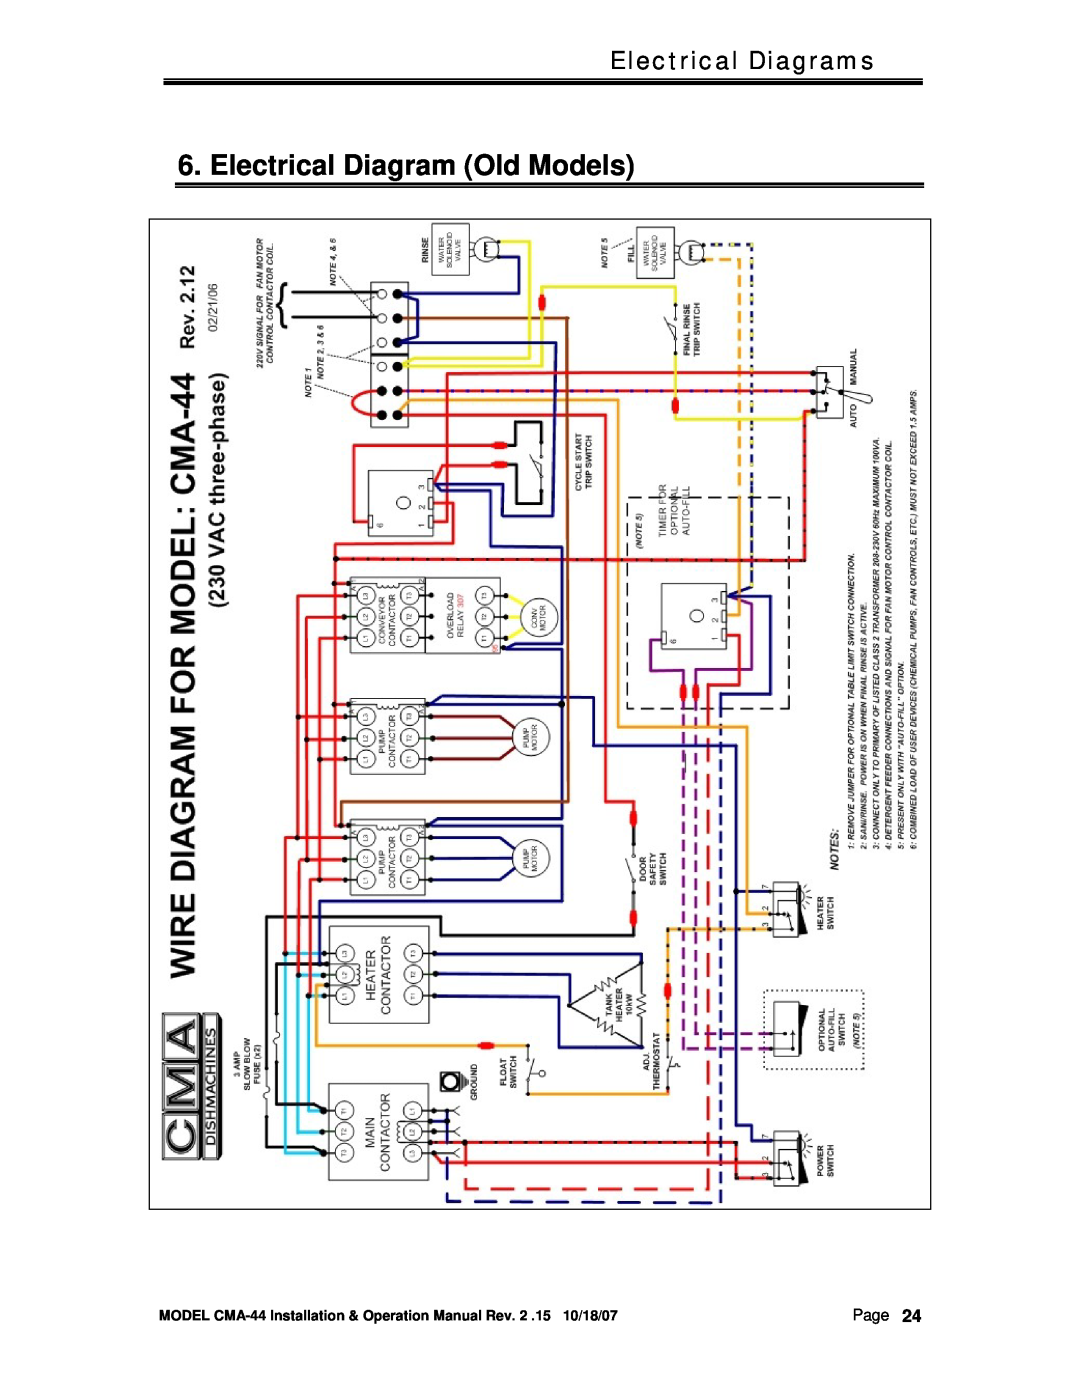 CMA Dishmachines CMA-44 manual Electrical Diagram Old Models, Electrical Diagrams 